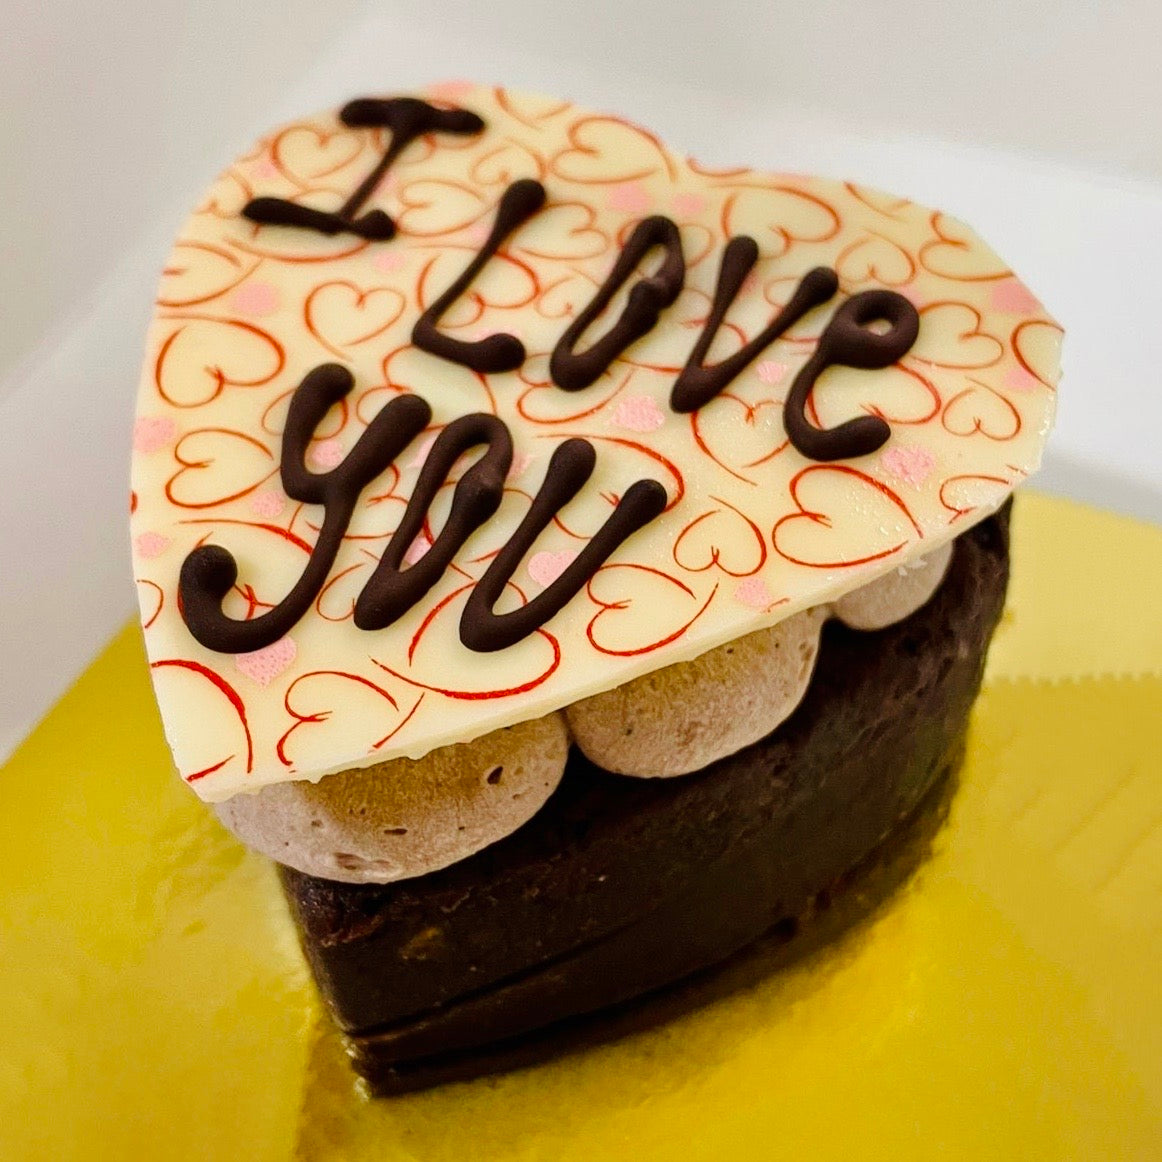 A brownie heart filled with chocolate buttercream and topped with white chocolate heart that says "I love you"